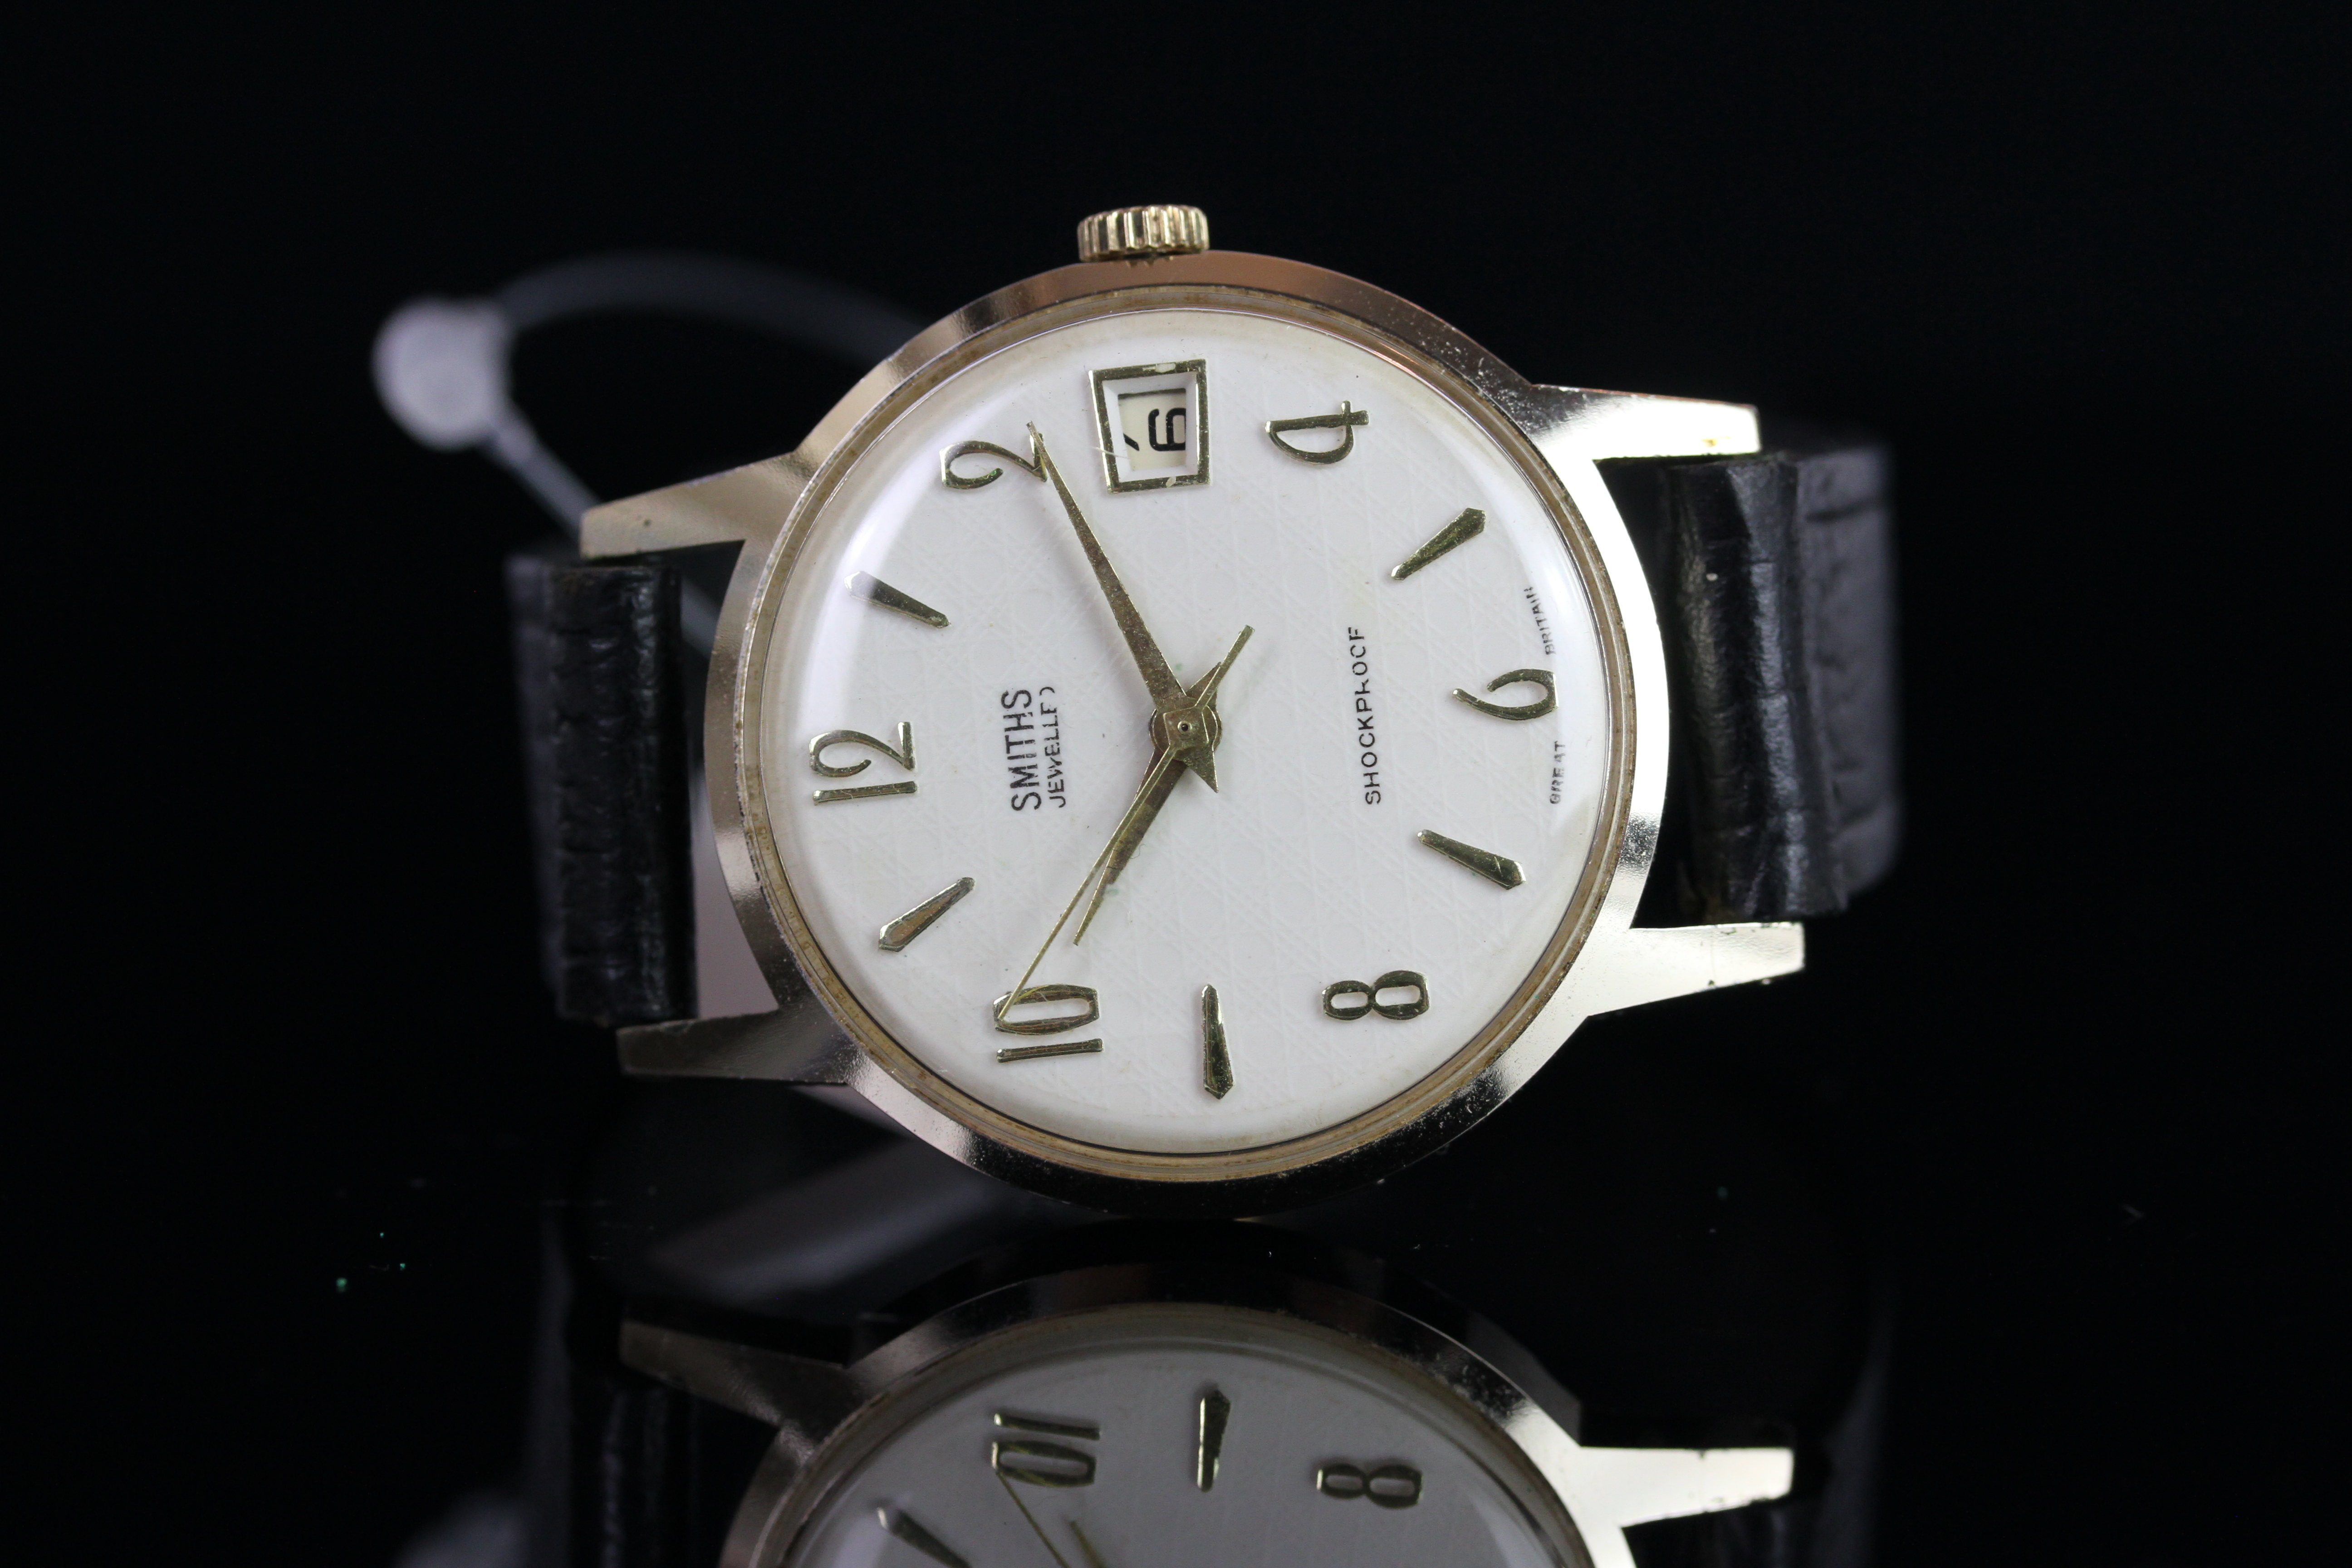 GENTLEMENS SMITHS DATE WRISTWATCH BOX & PAPERS, circular off white textures cross hatched dial - Image 2 of 4